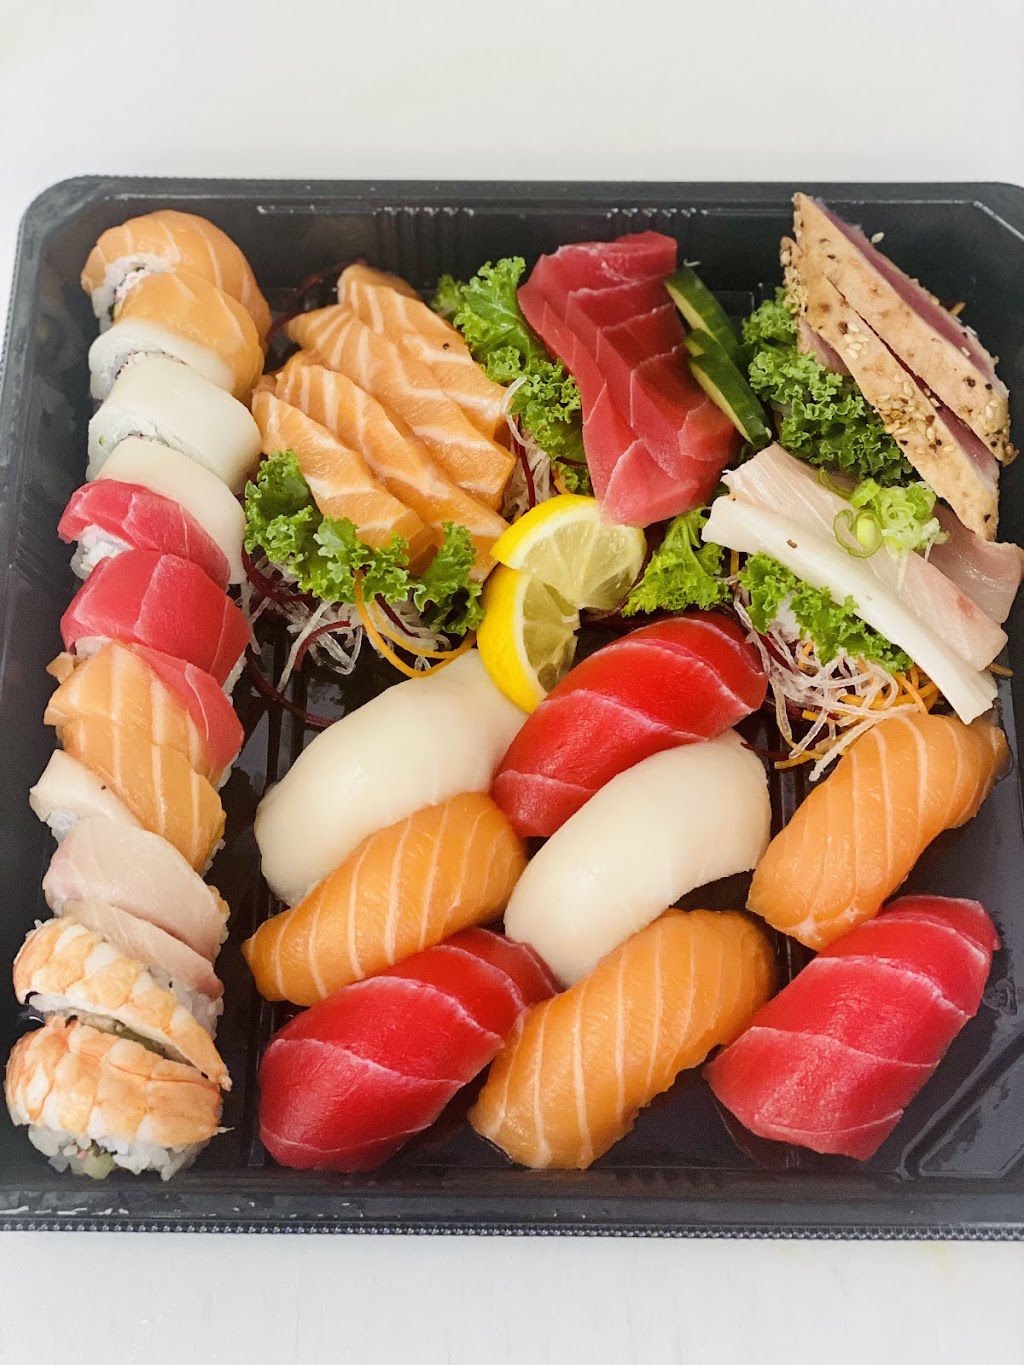 Star Sushi and Cuisine | 1400 Anderson Ave #2, Fort Lee, NJ 07024 | Phone: (201) 267-0527